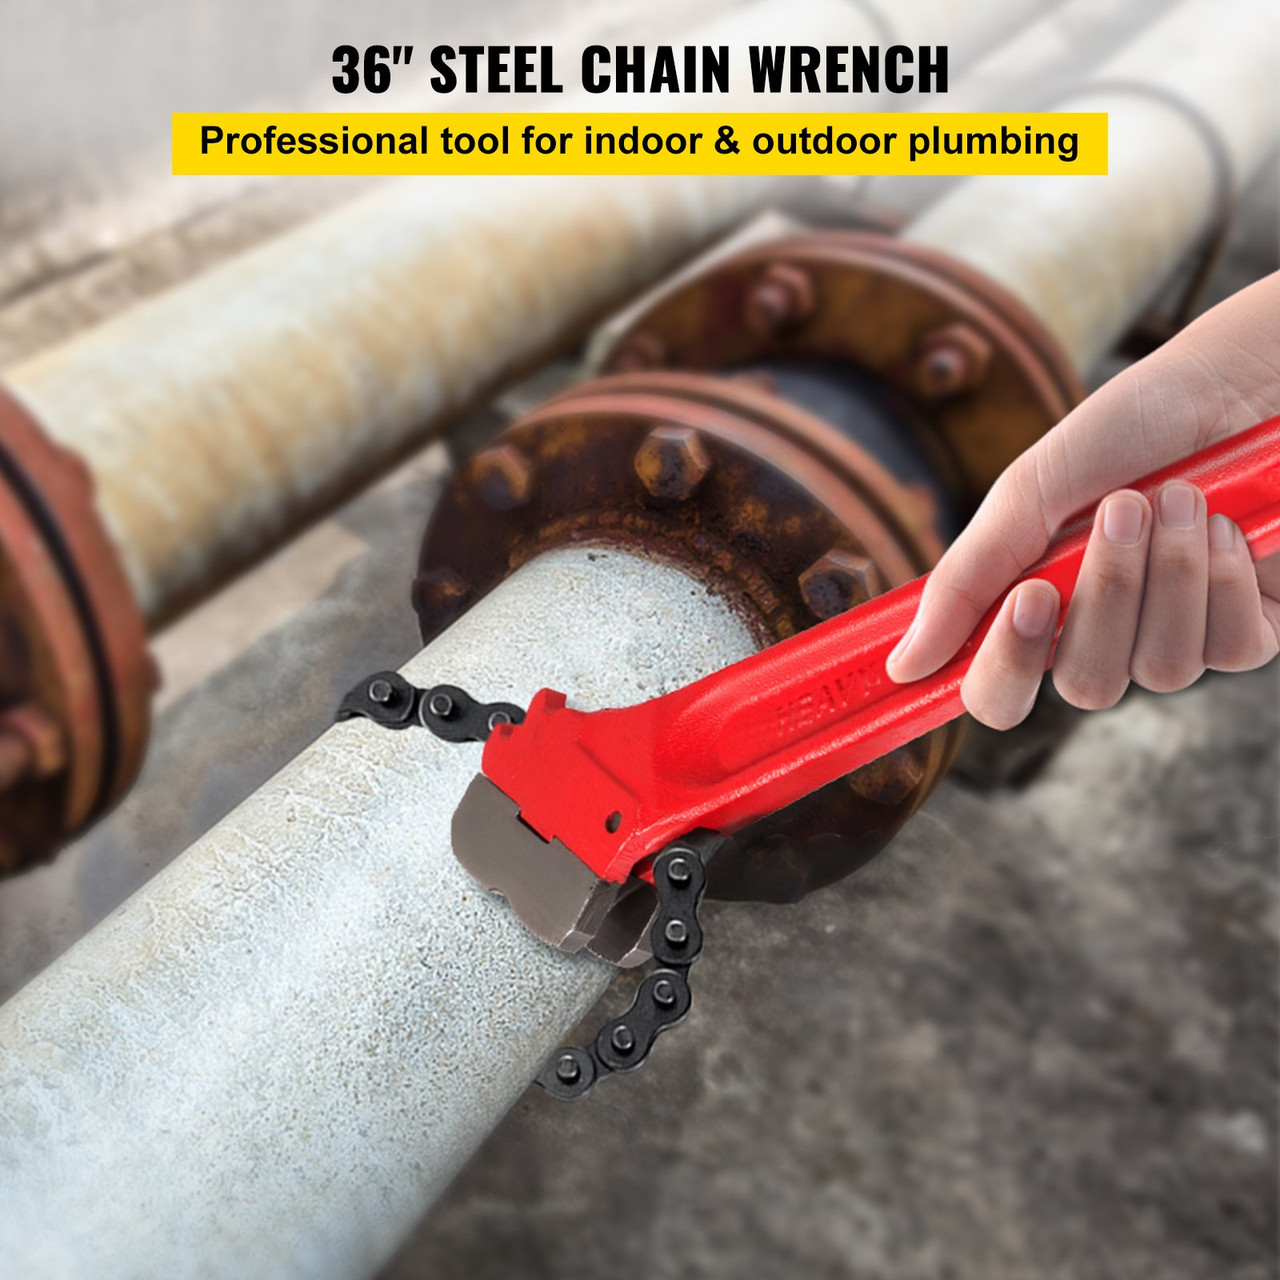 36" Pipe Chain Wrench, Steel Ratcheting Wrench 30" Chain 7.5" Capacity